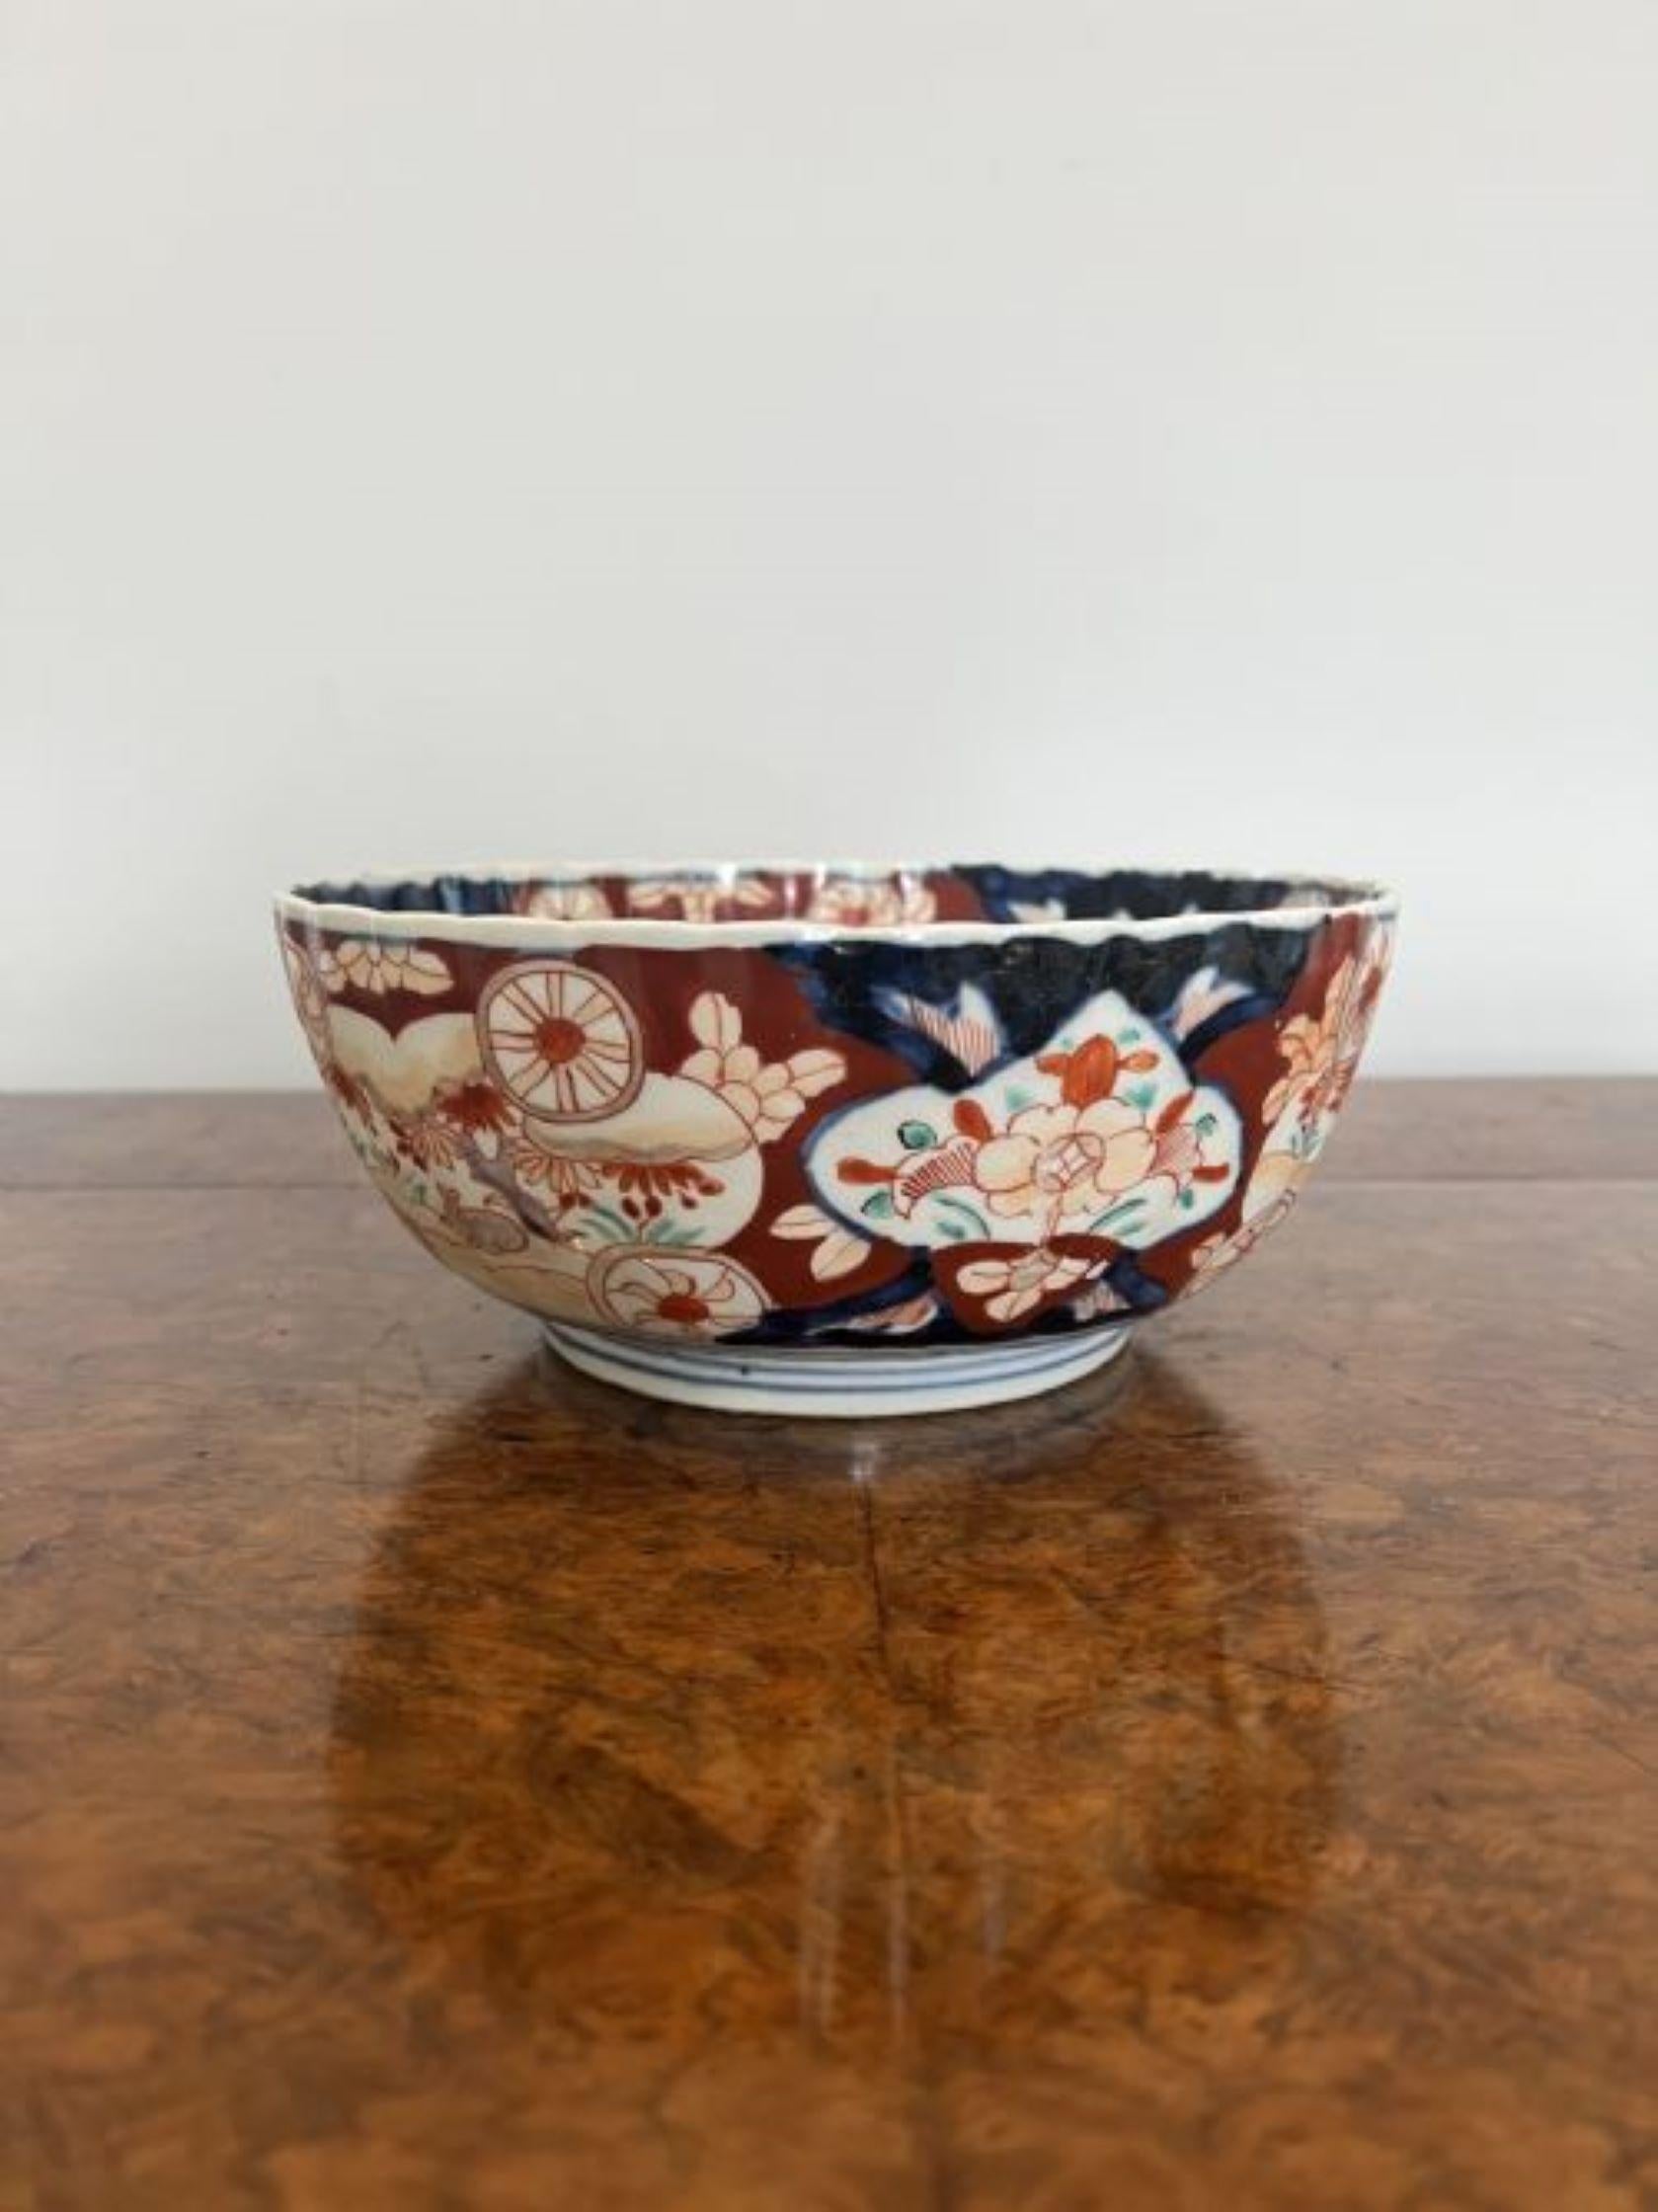 Ceramic Lovely antique Japanese imari bowl with a scallop shaped edge For Sale